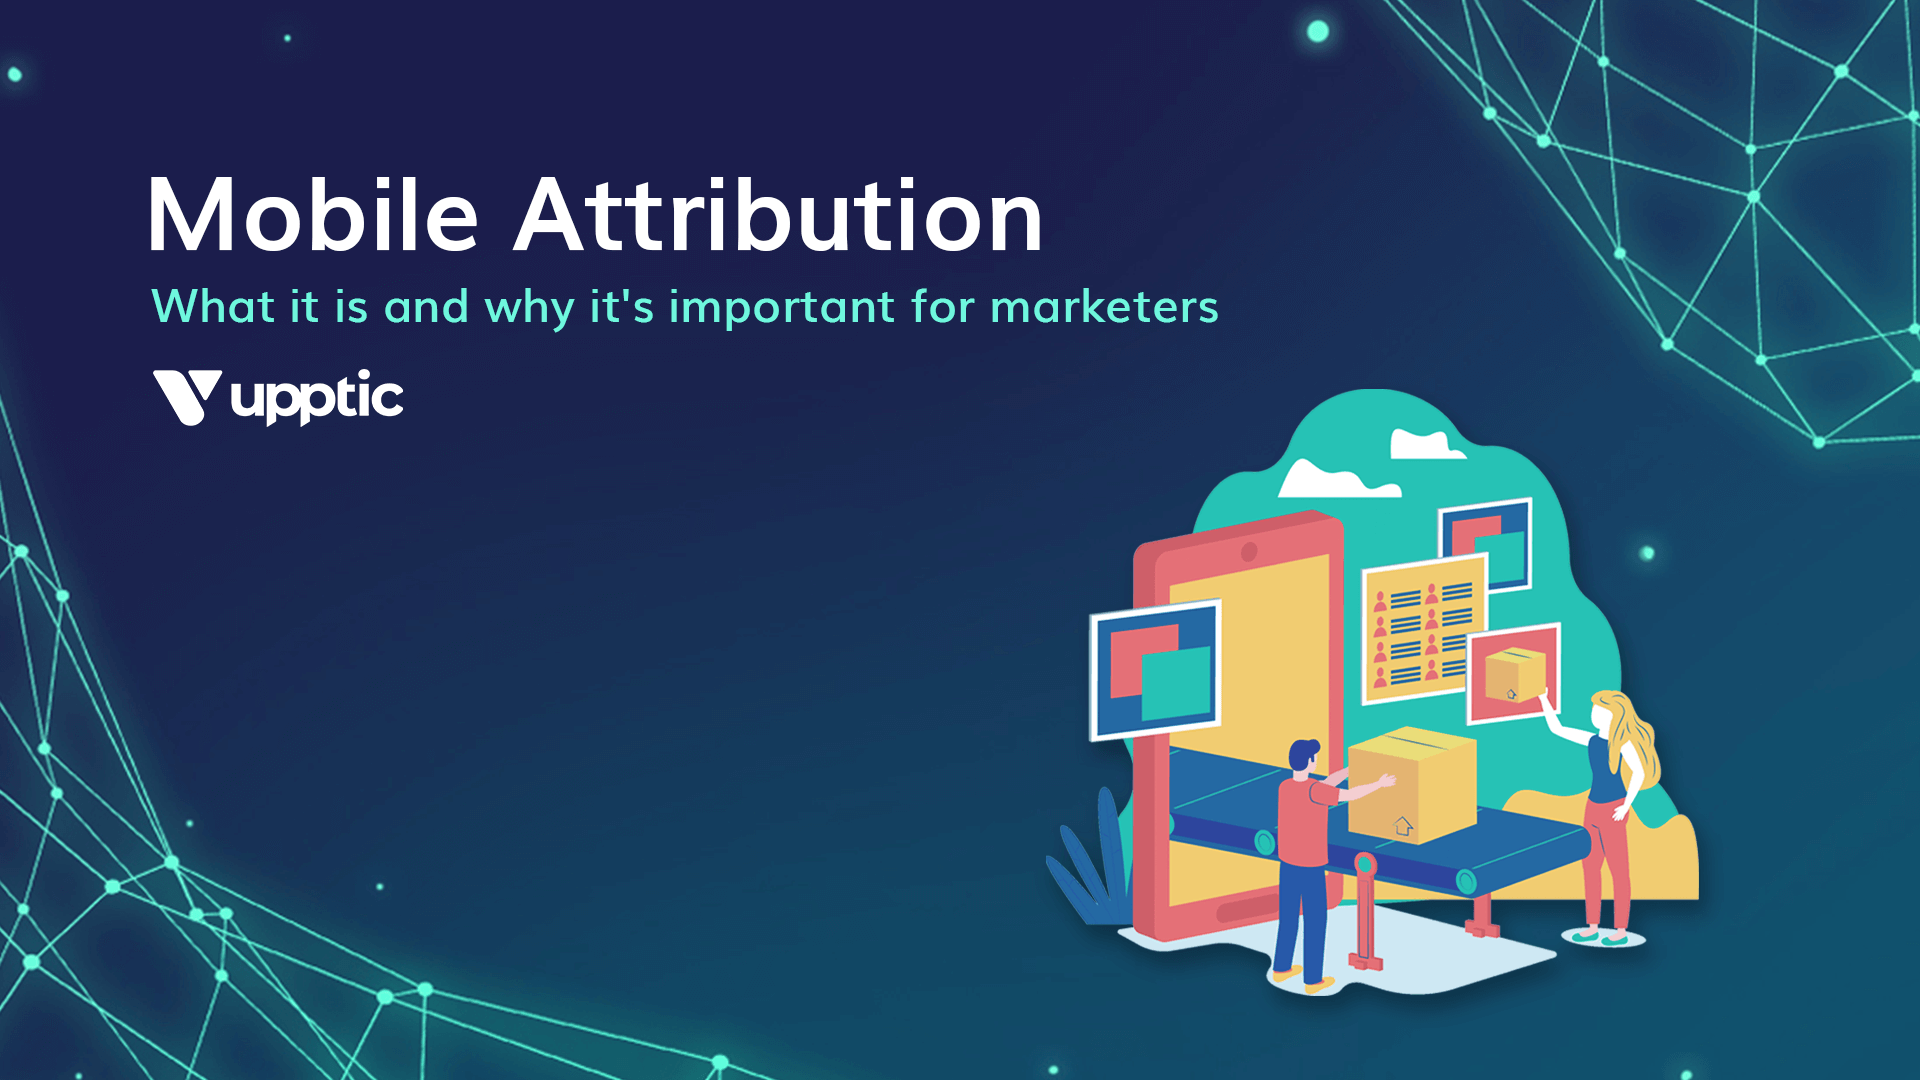 Mobile Attribution: What it is and why it's important for marketers